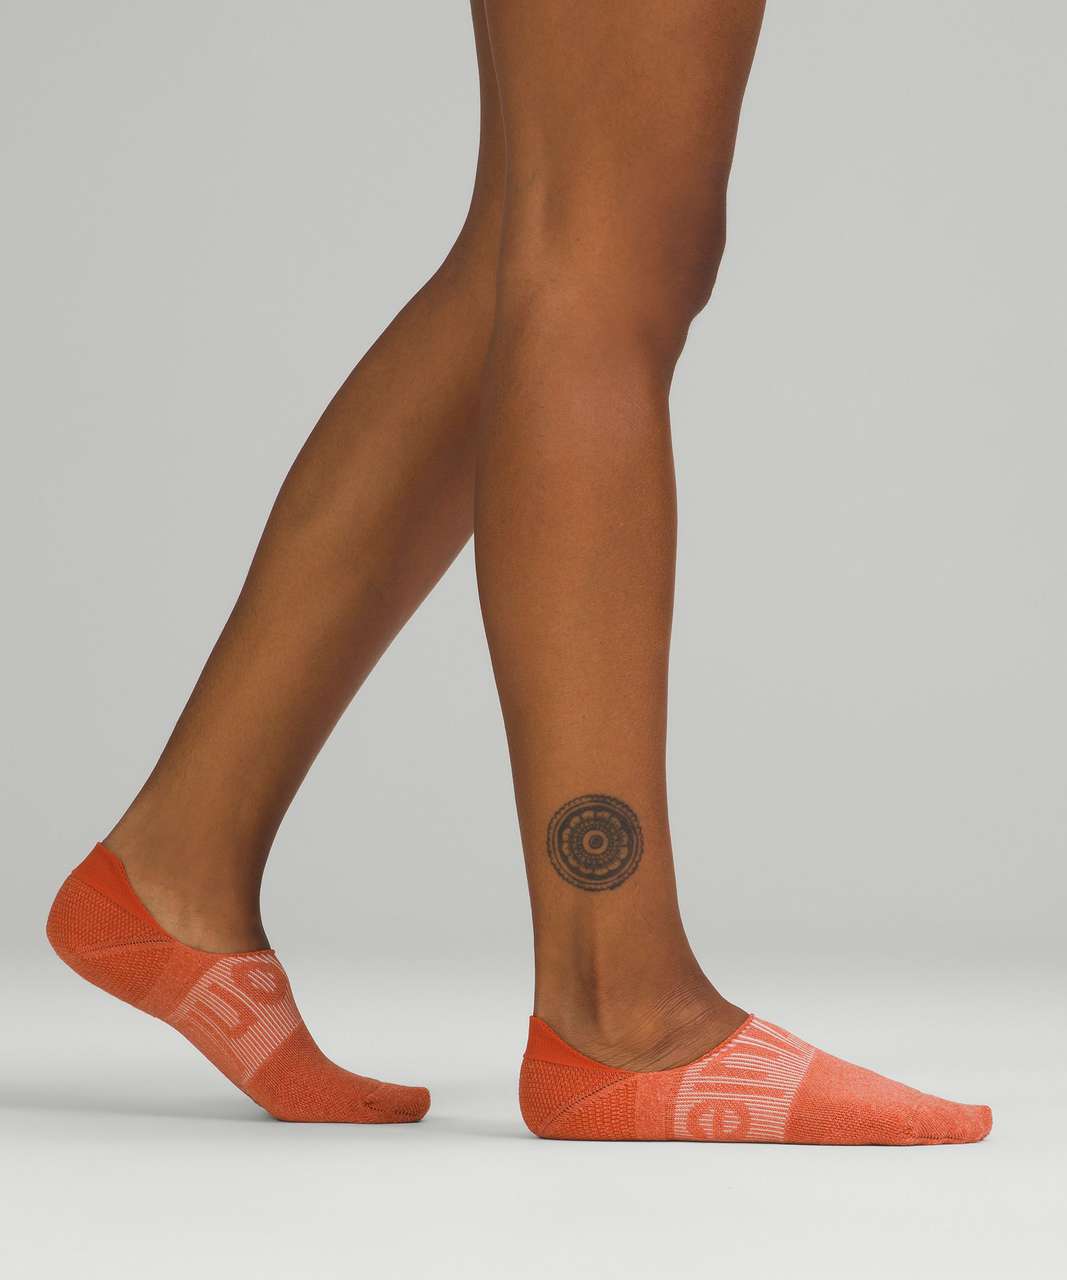 Lululemon Power Stride No-Show Sock with Active Grip 3 Pack - Highlight Yellow / Arctic Green / Canyon Orange